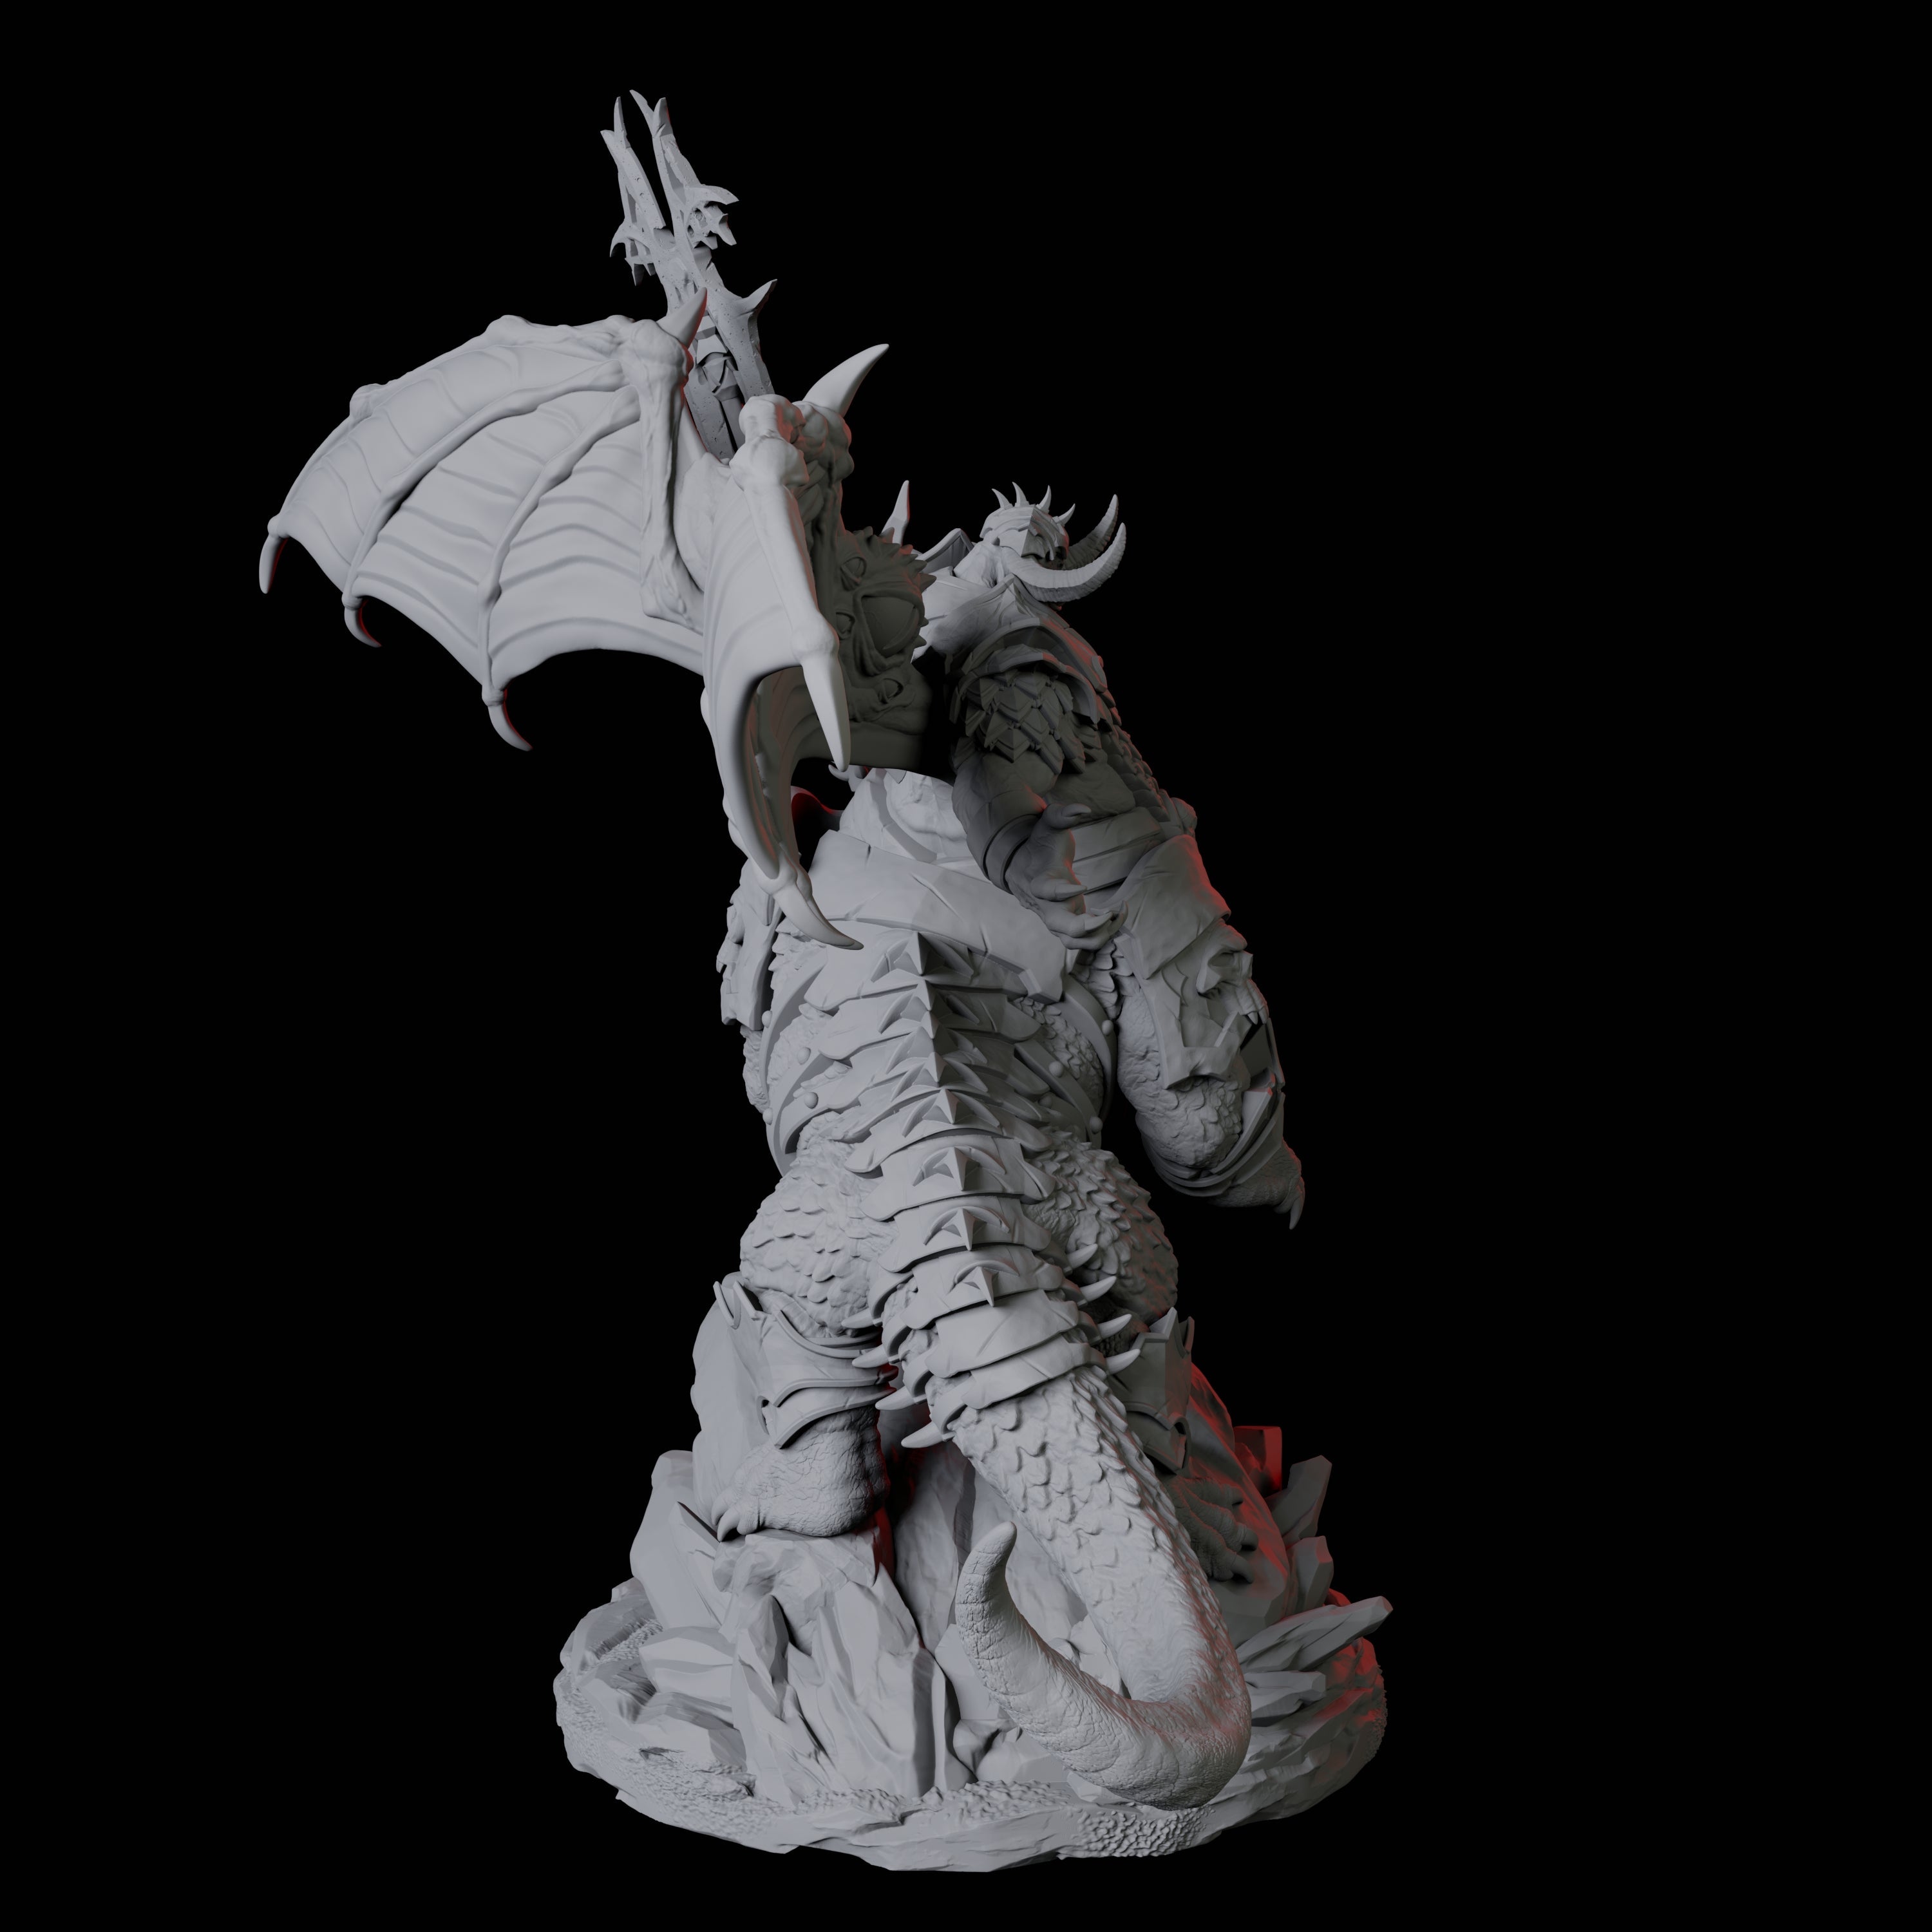 Four Attacking Vavakia Miniature for Dungeons and Dragons, Pathfinder or other TTRPGs